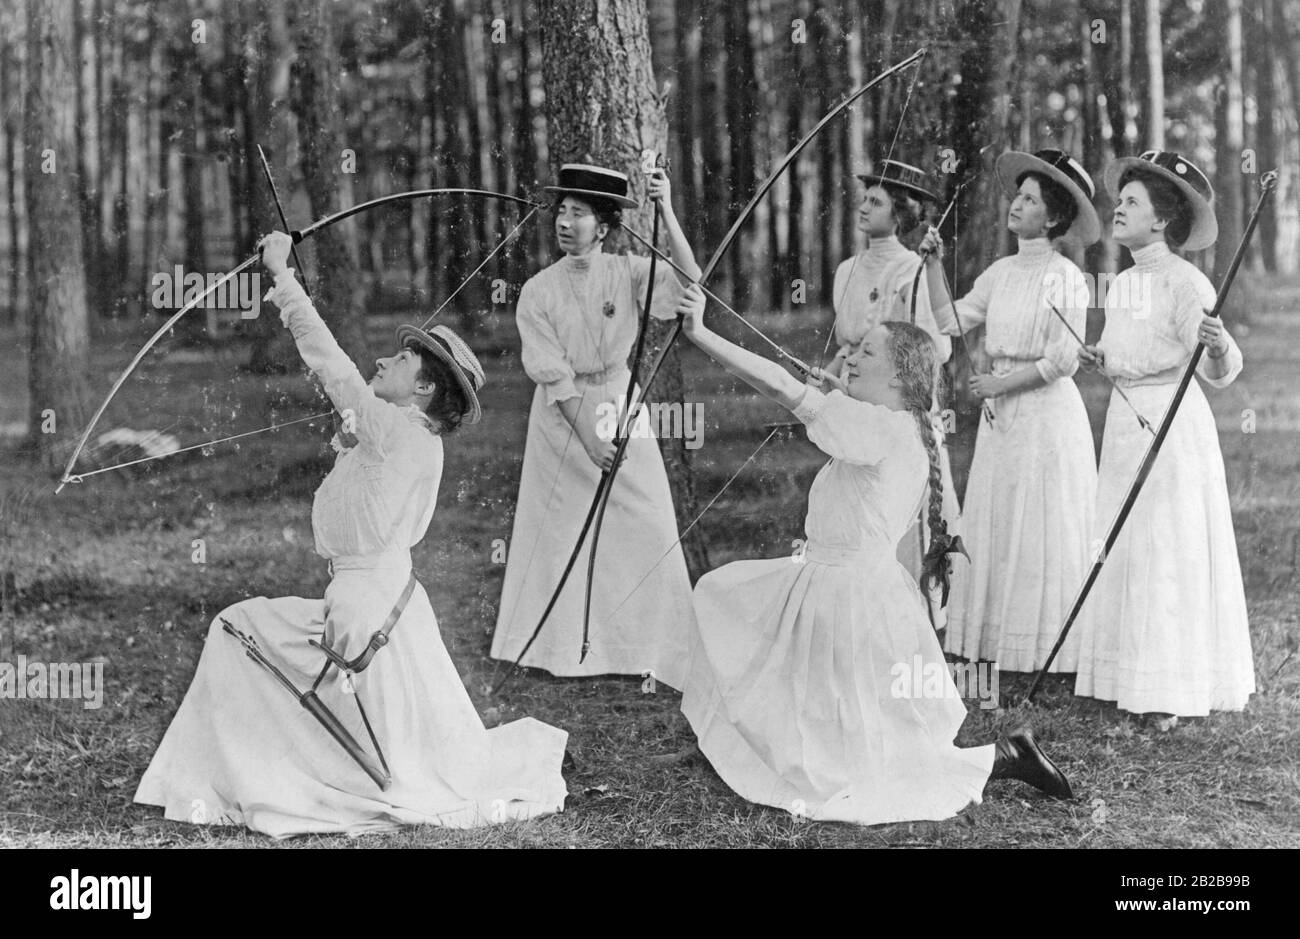 Girl from the upper class shooting gracefully with bow and arrows in the forest. The photo is undated. Stock Photo